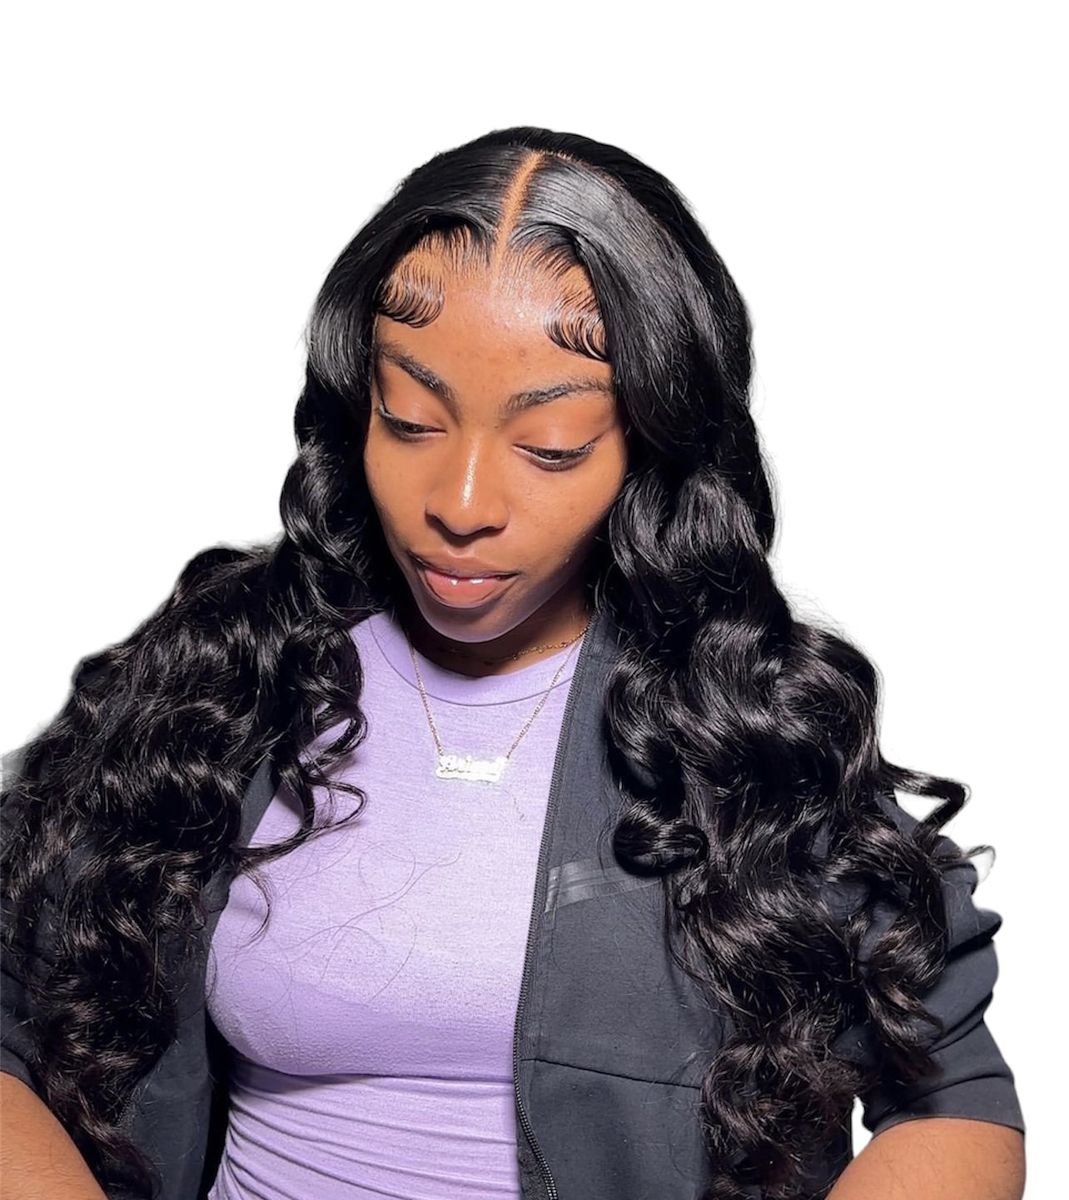 20 inches Body Wave Brazilian 100% Human Hair Wig, Full Frontal Closure, Shop Today. Get it Tomorrow!